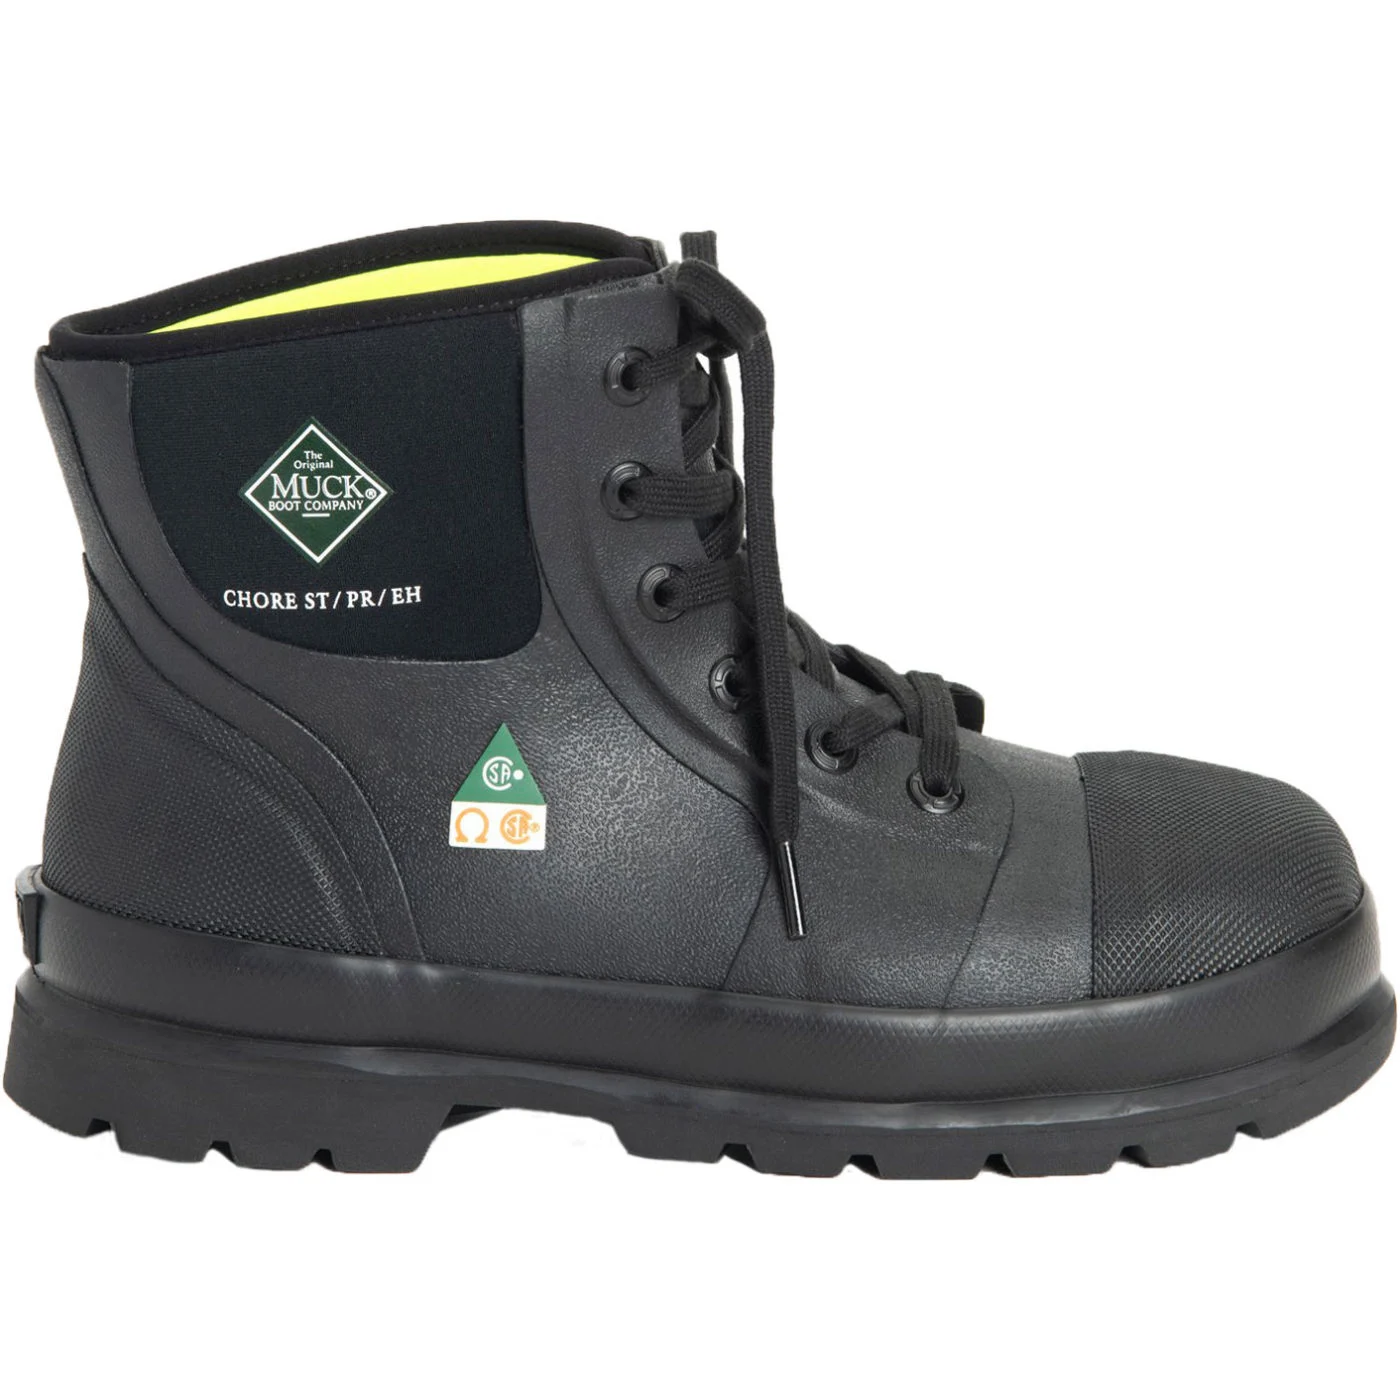 Muck Men's Chore Classic 6 Inch CSA Steel Toe Boots from Columbia Safety